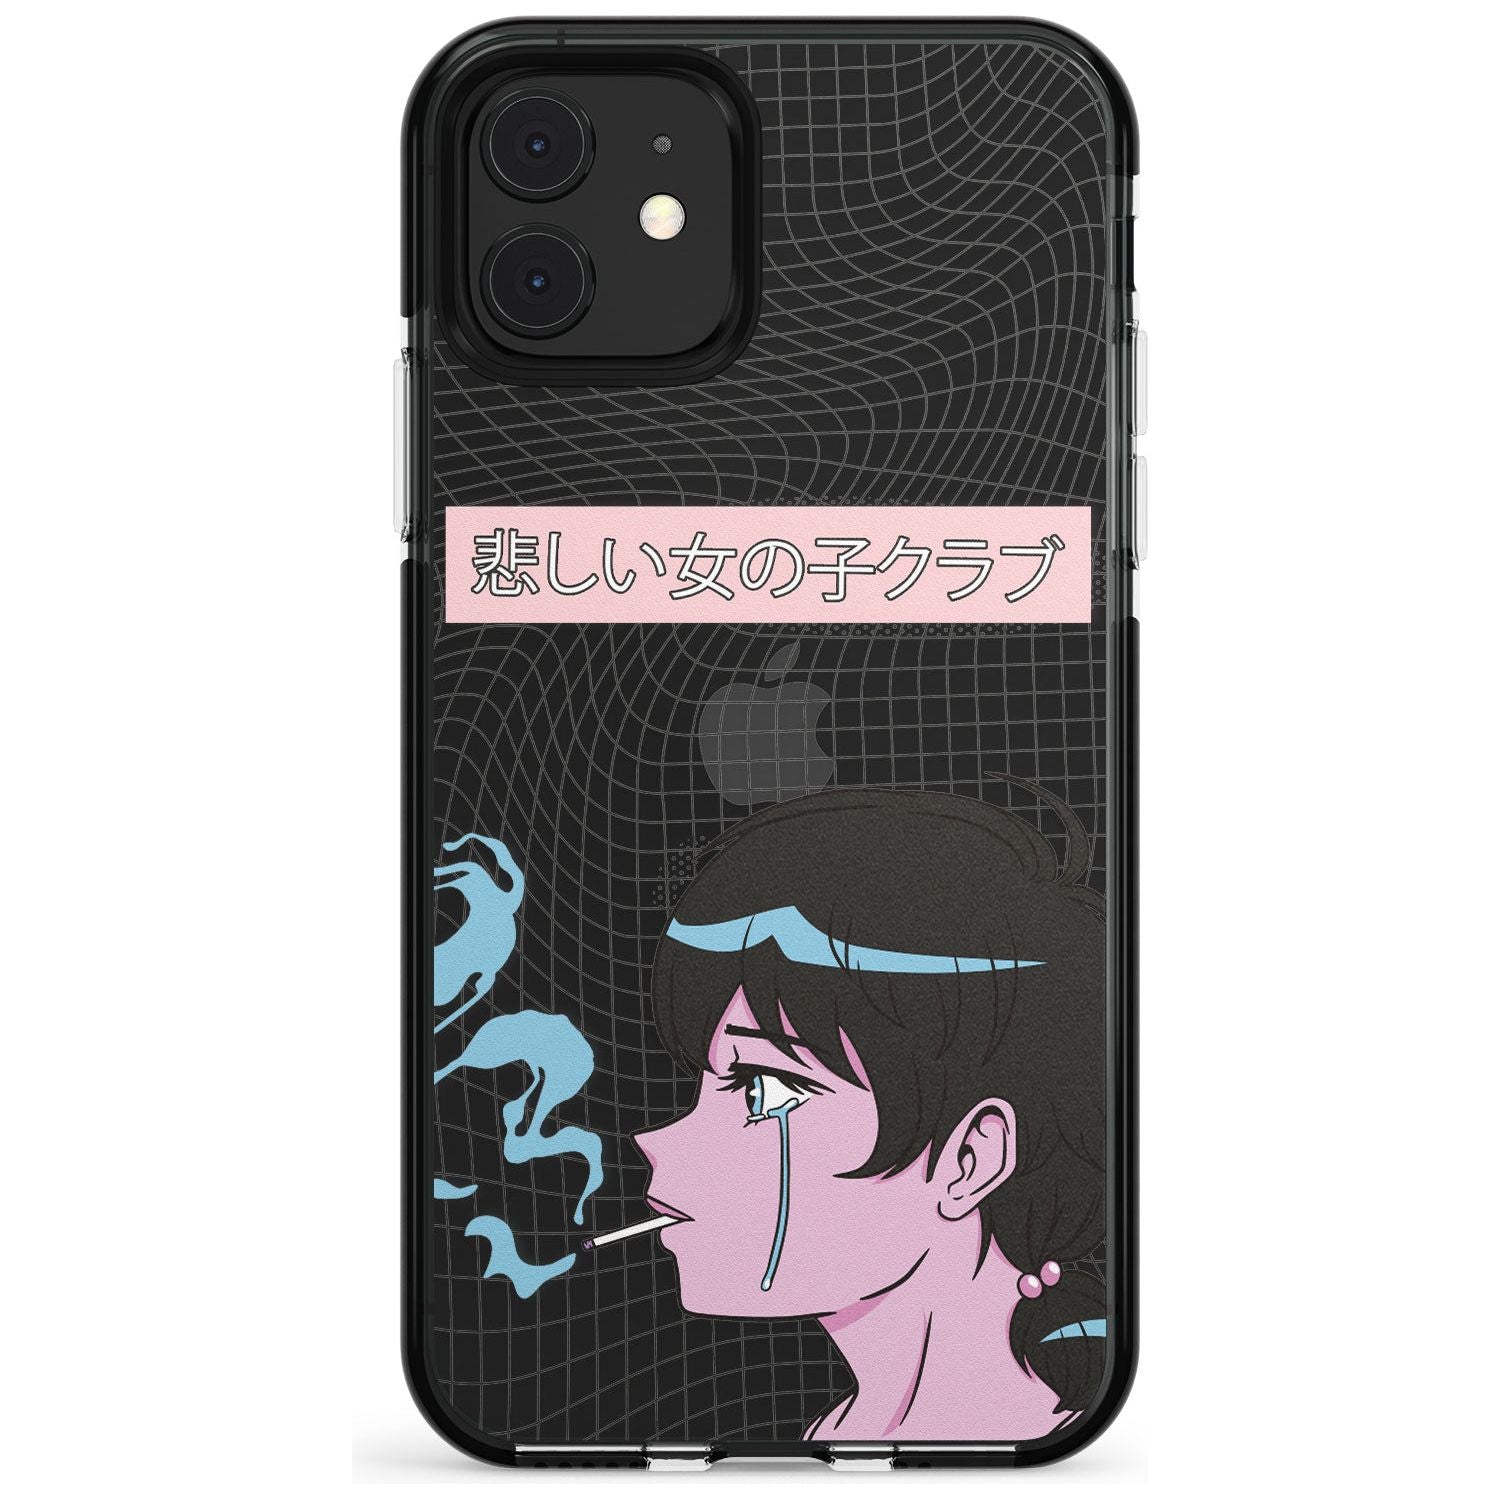 Lost Love Black Impact Phone Case for iPhone 11 Pro Max